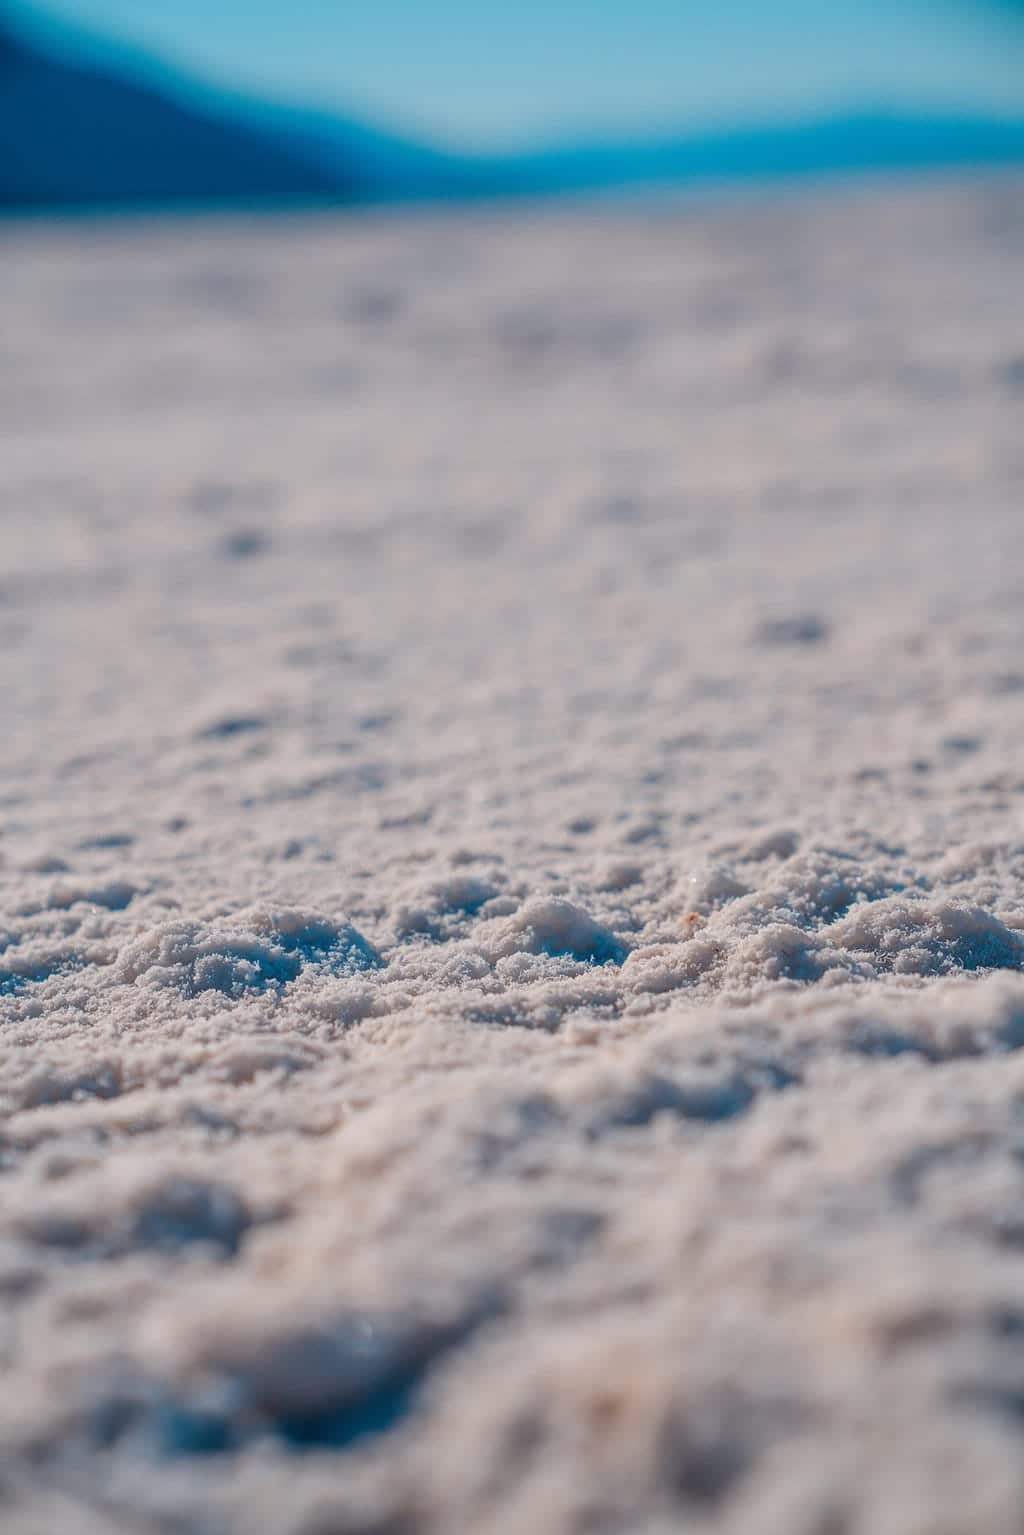 Salt crystals at Badwater Basin in Death Valley National Park California